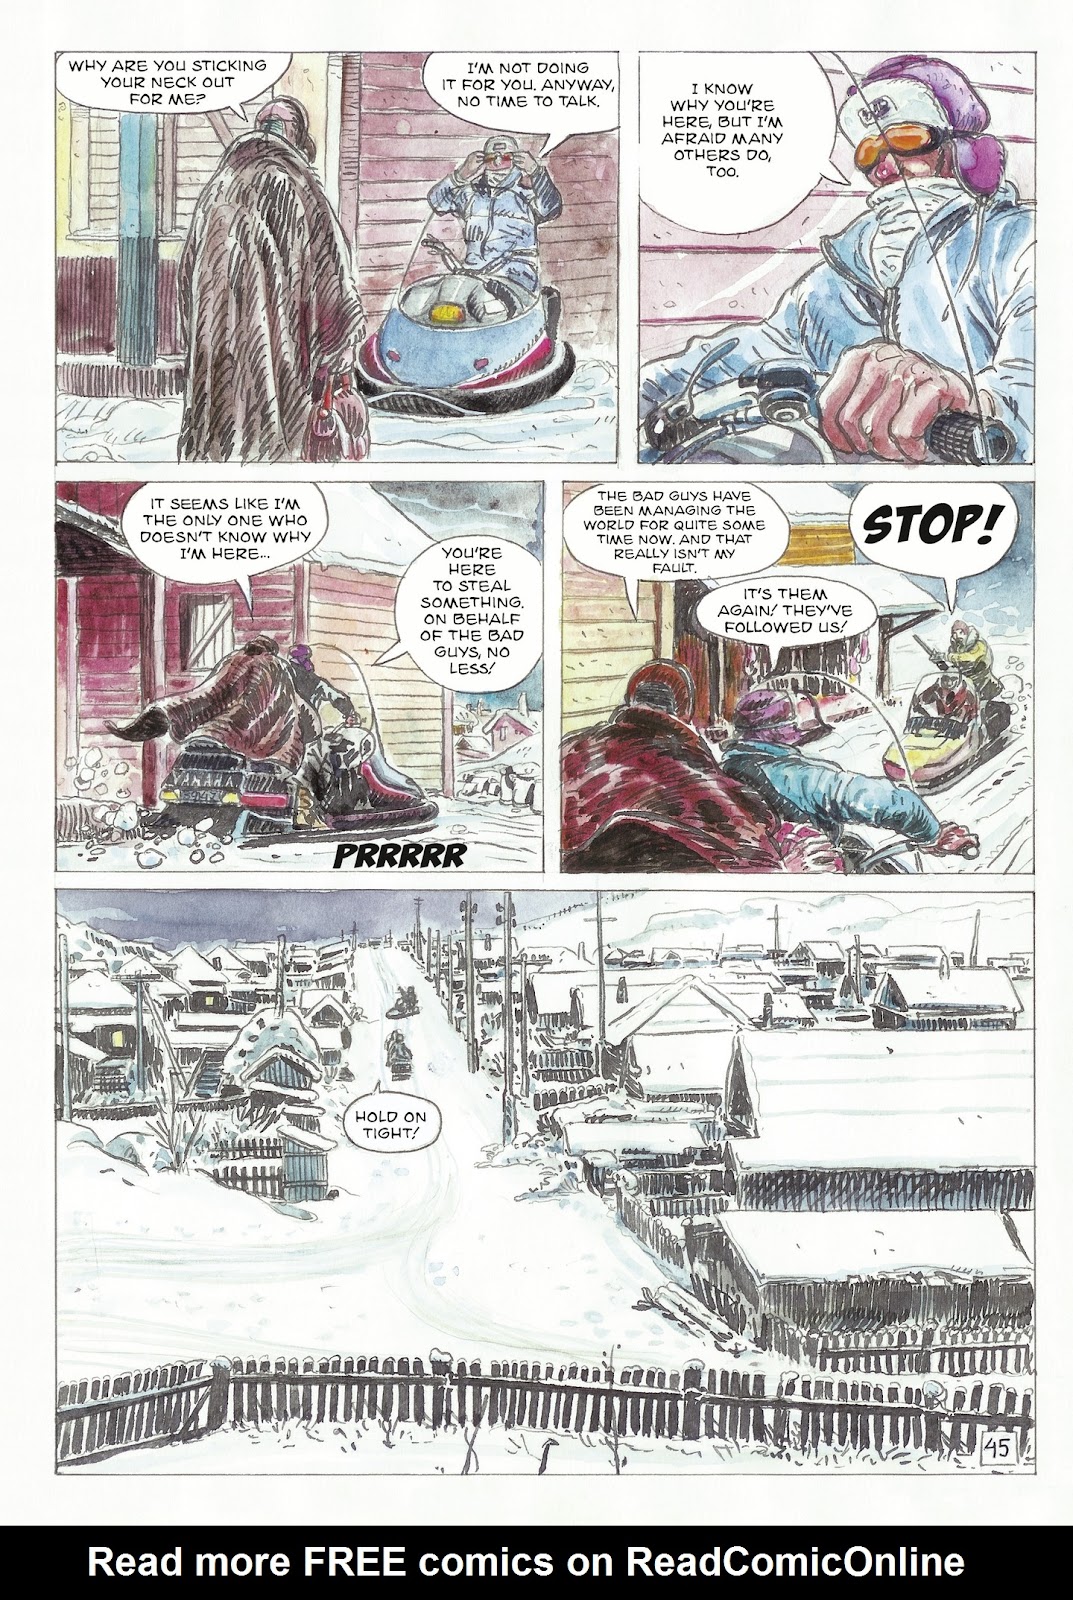 The Man With the Bear issue 1 - Page 47